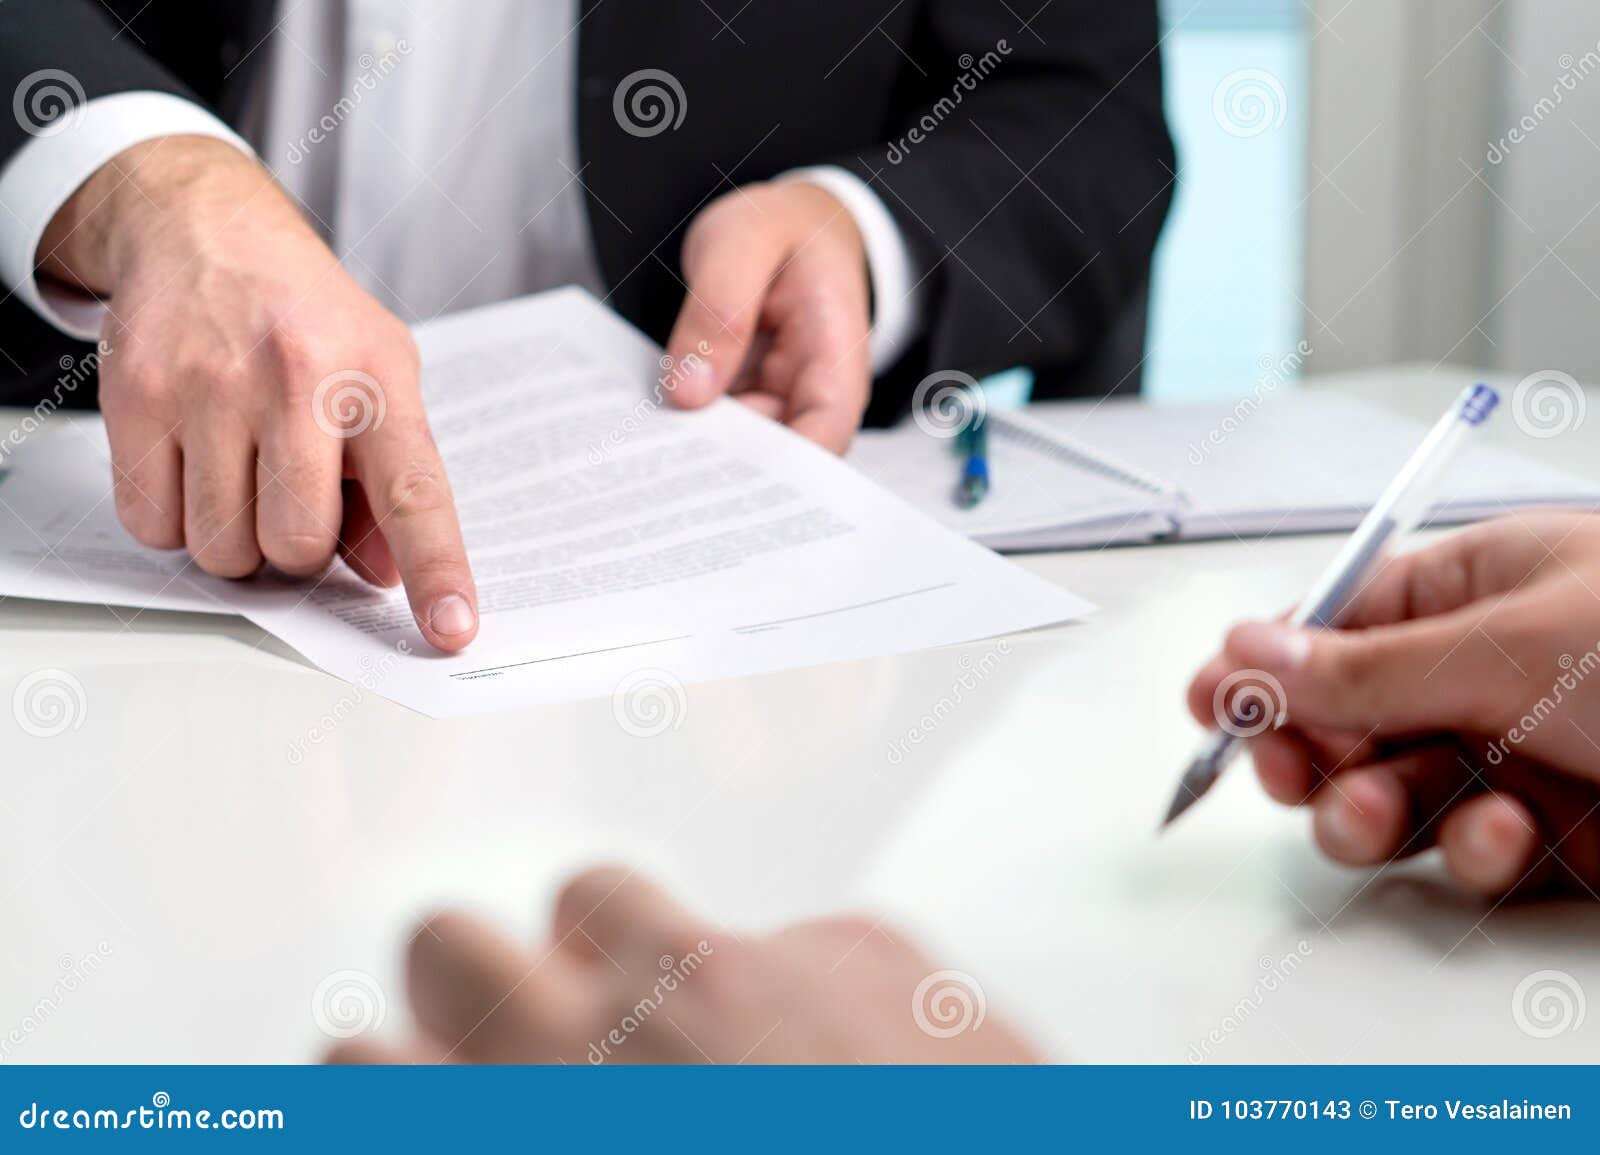 signing a contract or agreement.